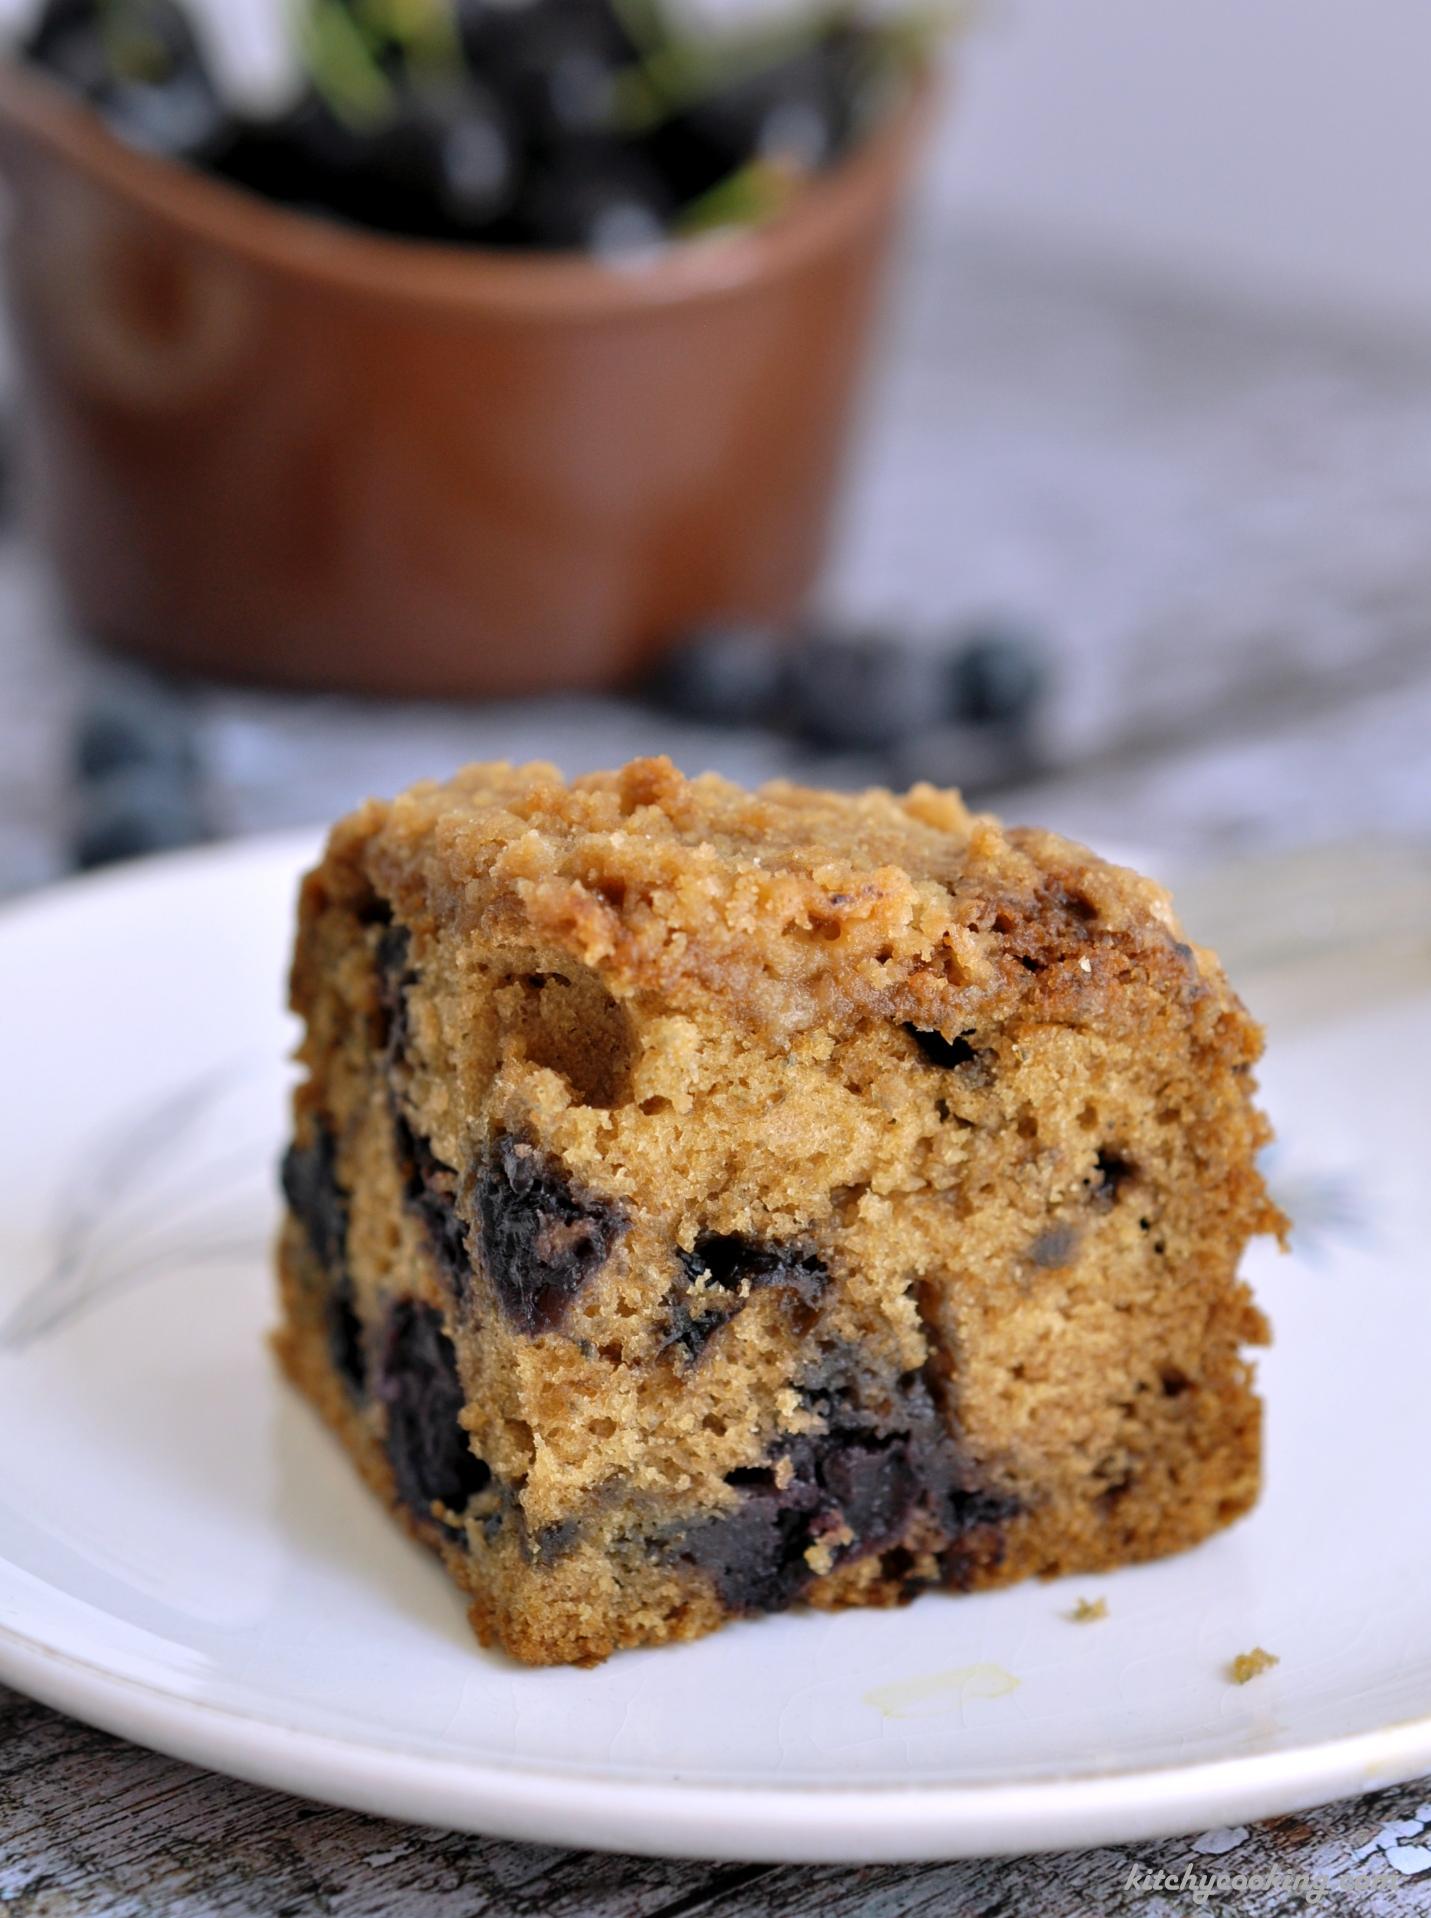  The aroma of fresh coffee and baked goods will fill your home as you make this cake.